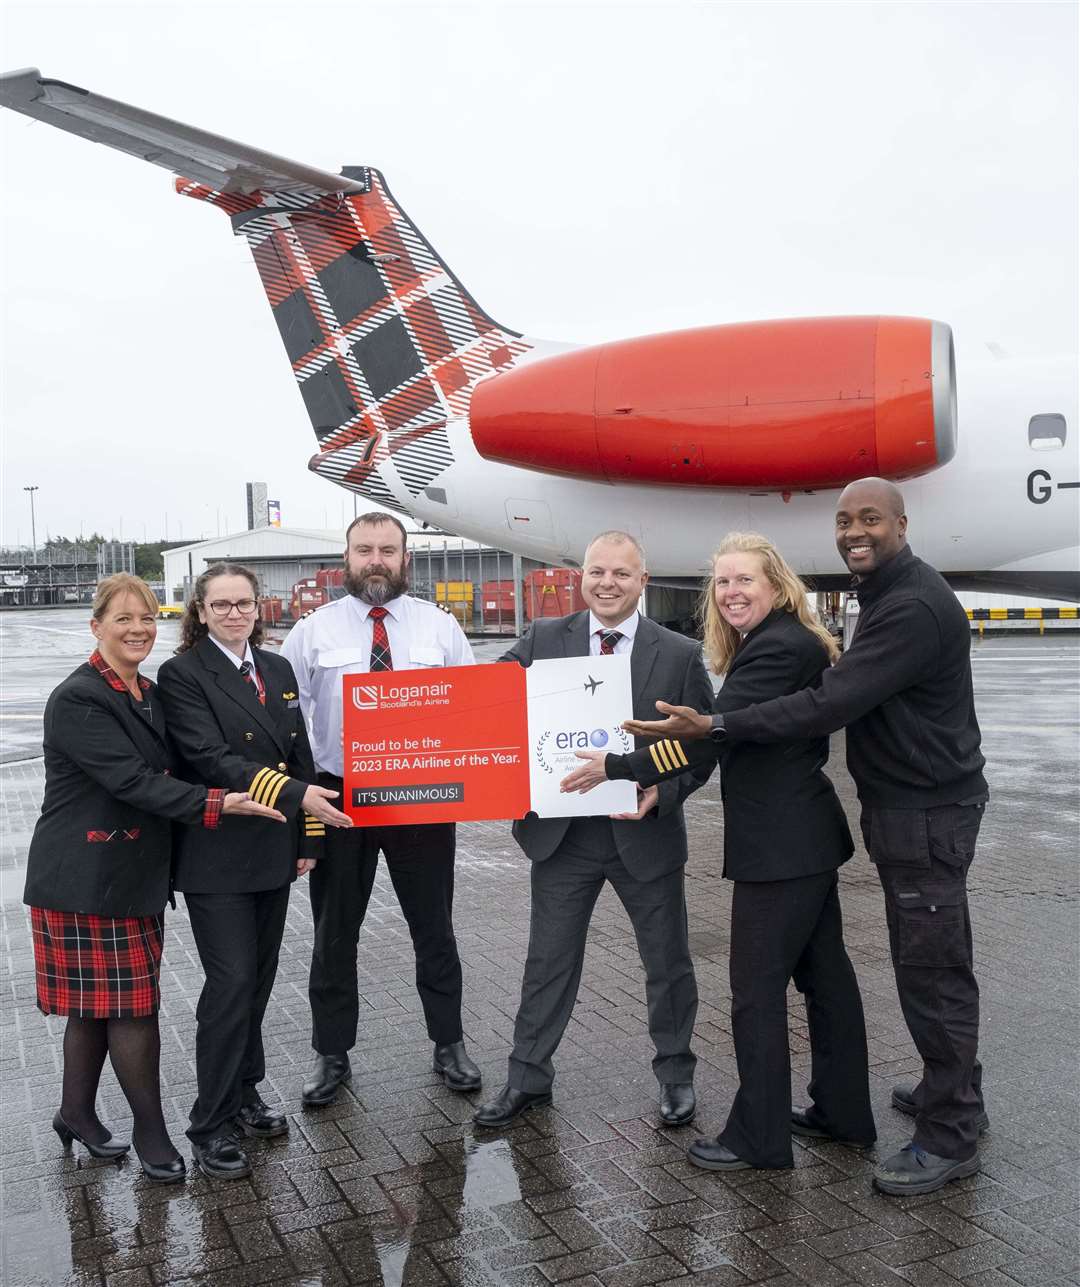 Loganair has been named Airline of the Year for 2023 by the European Regional Airline Association.